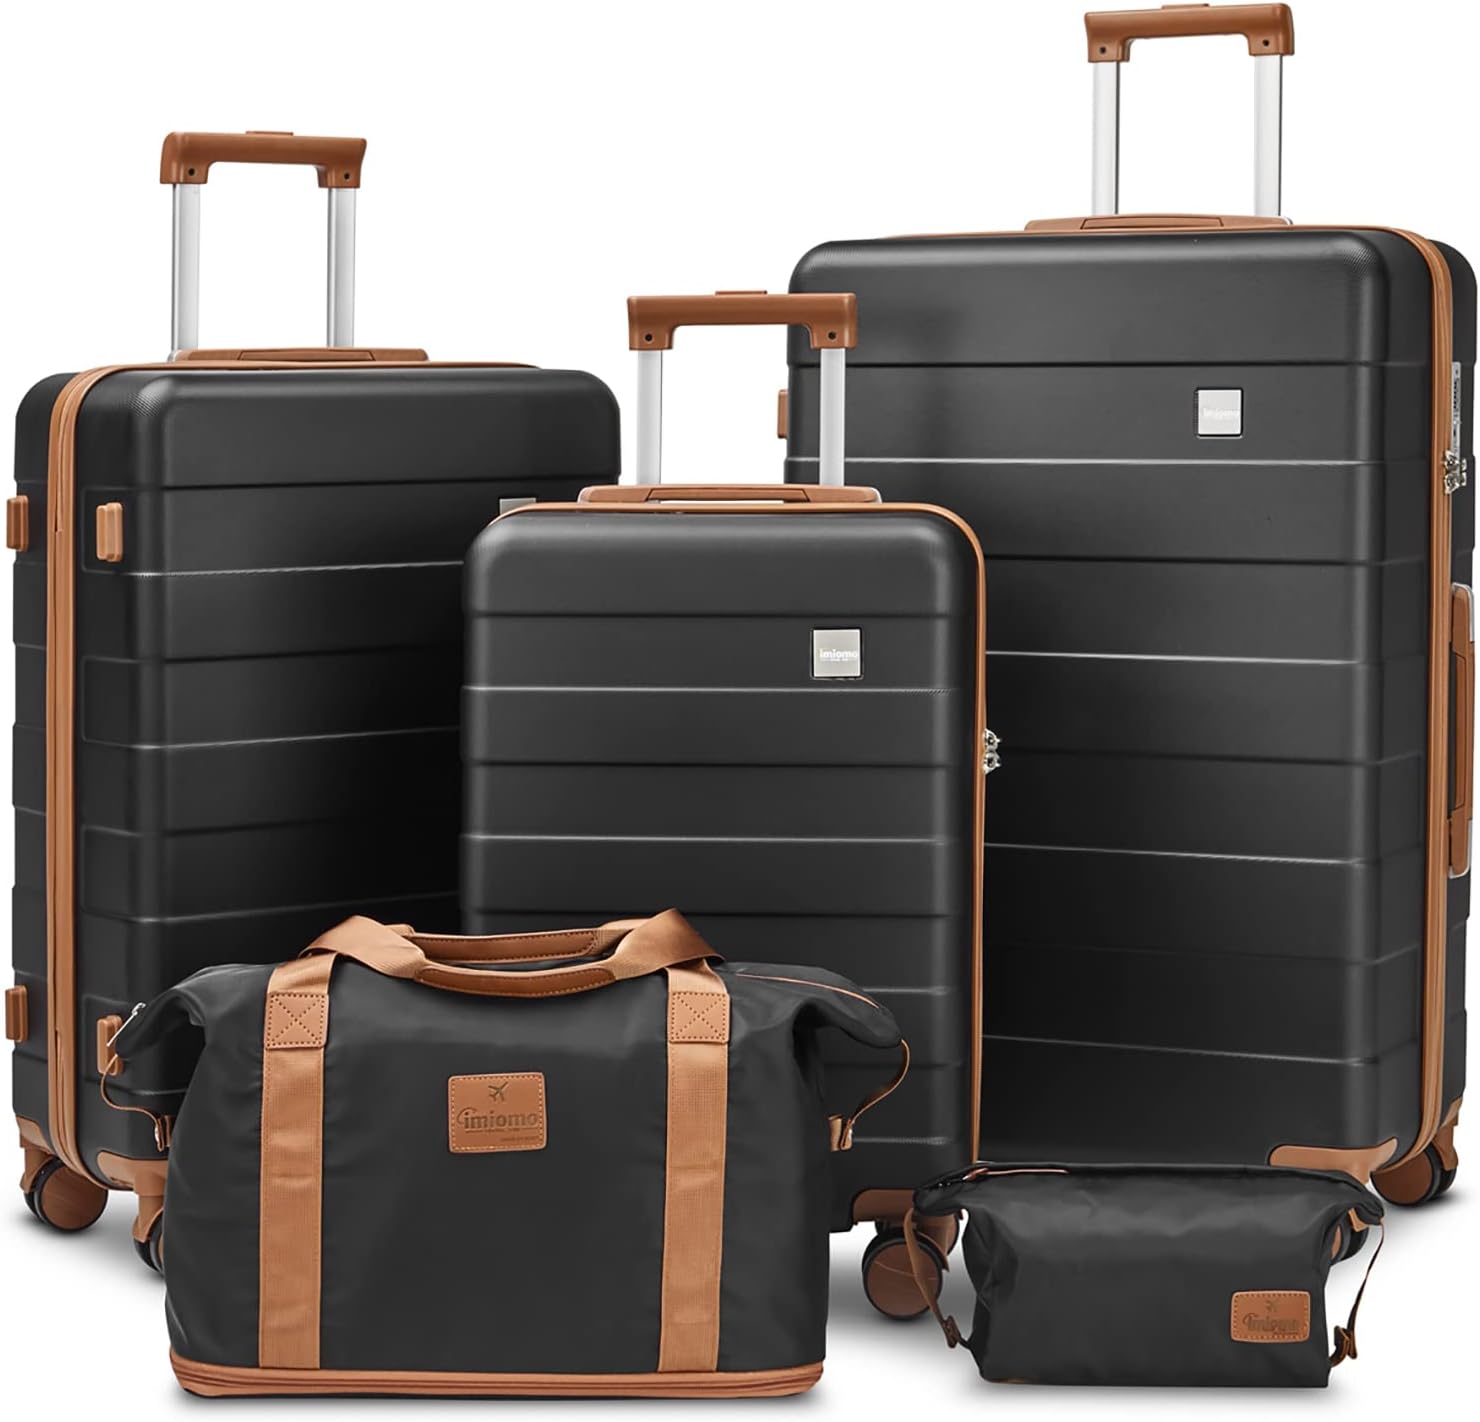 imiomo Luggage, ABS Hard Luggage Set with Spinner Wheels, with TSA Lock, Lightweight and Durable (Unisex) - image 1 of 7